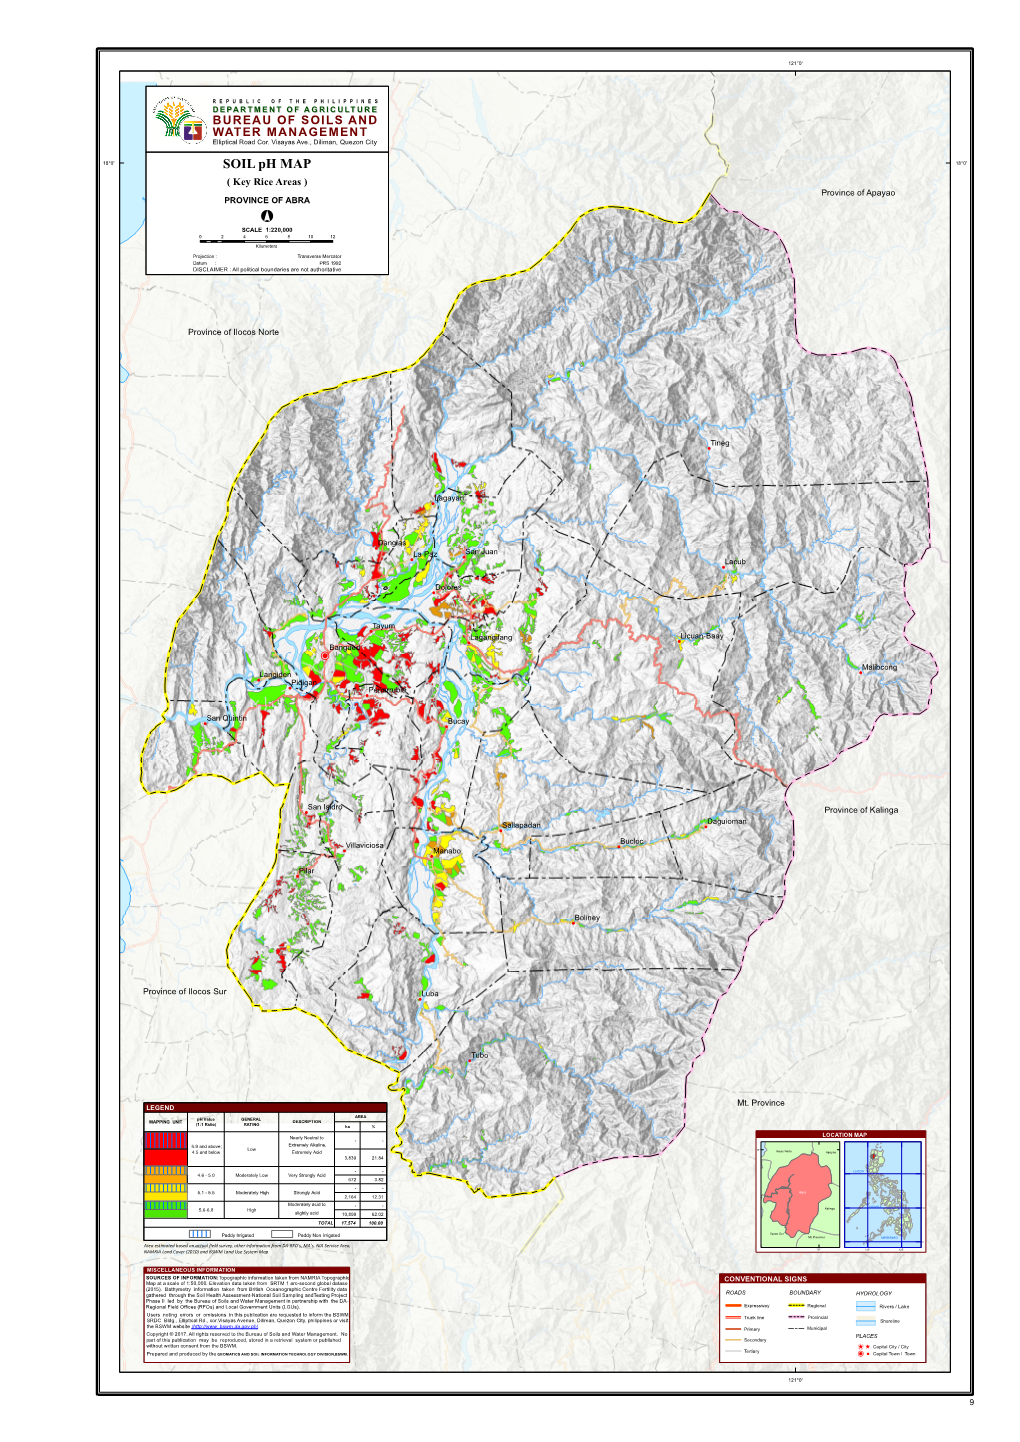 SOIL Ph MAP 18°0' ( Key Rice Areas ) Province of Apayao PROVINCE of ABRA ° SCALE 1:220,000 0 2 4 6 8 10 12